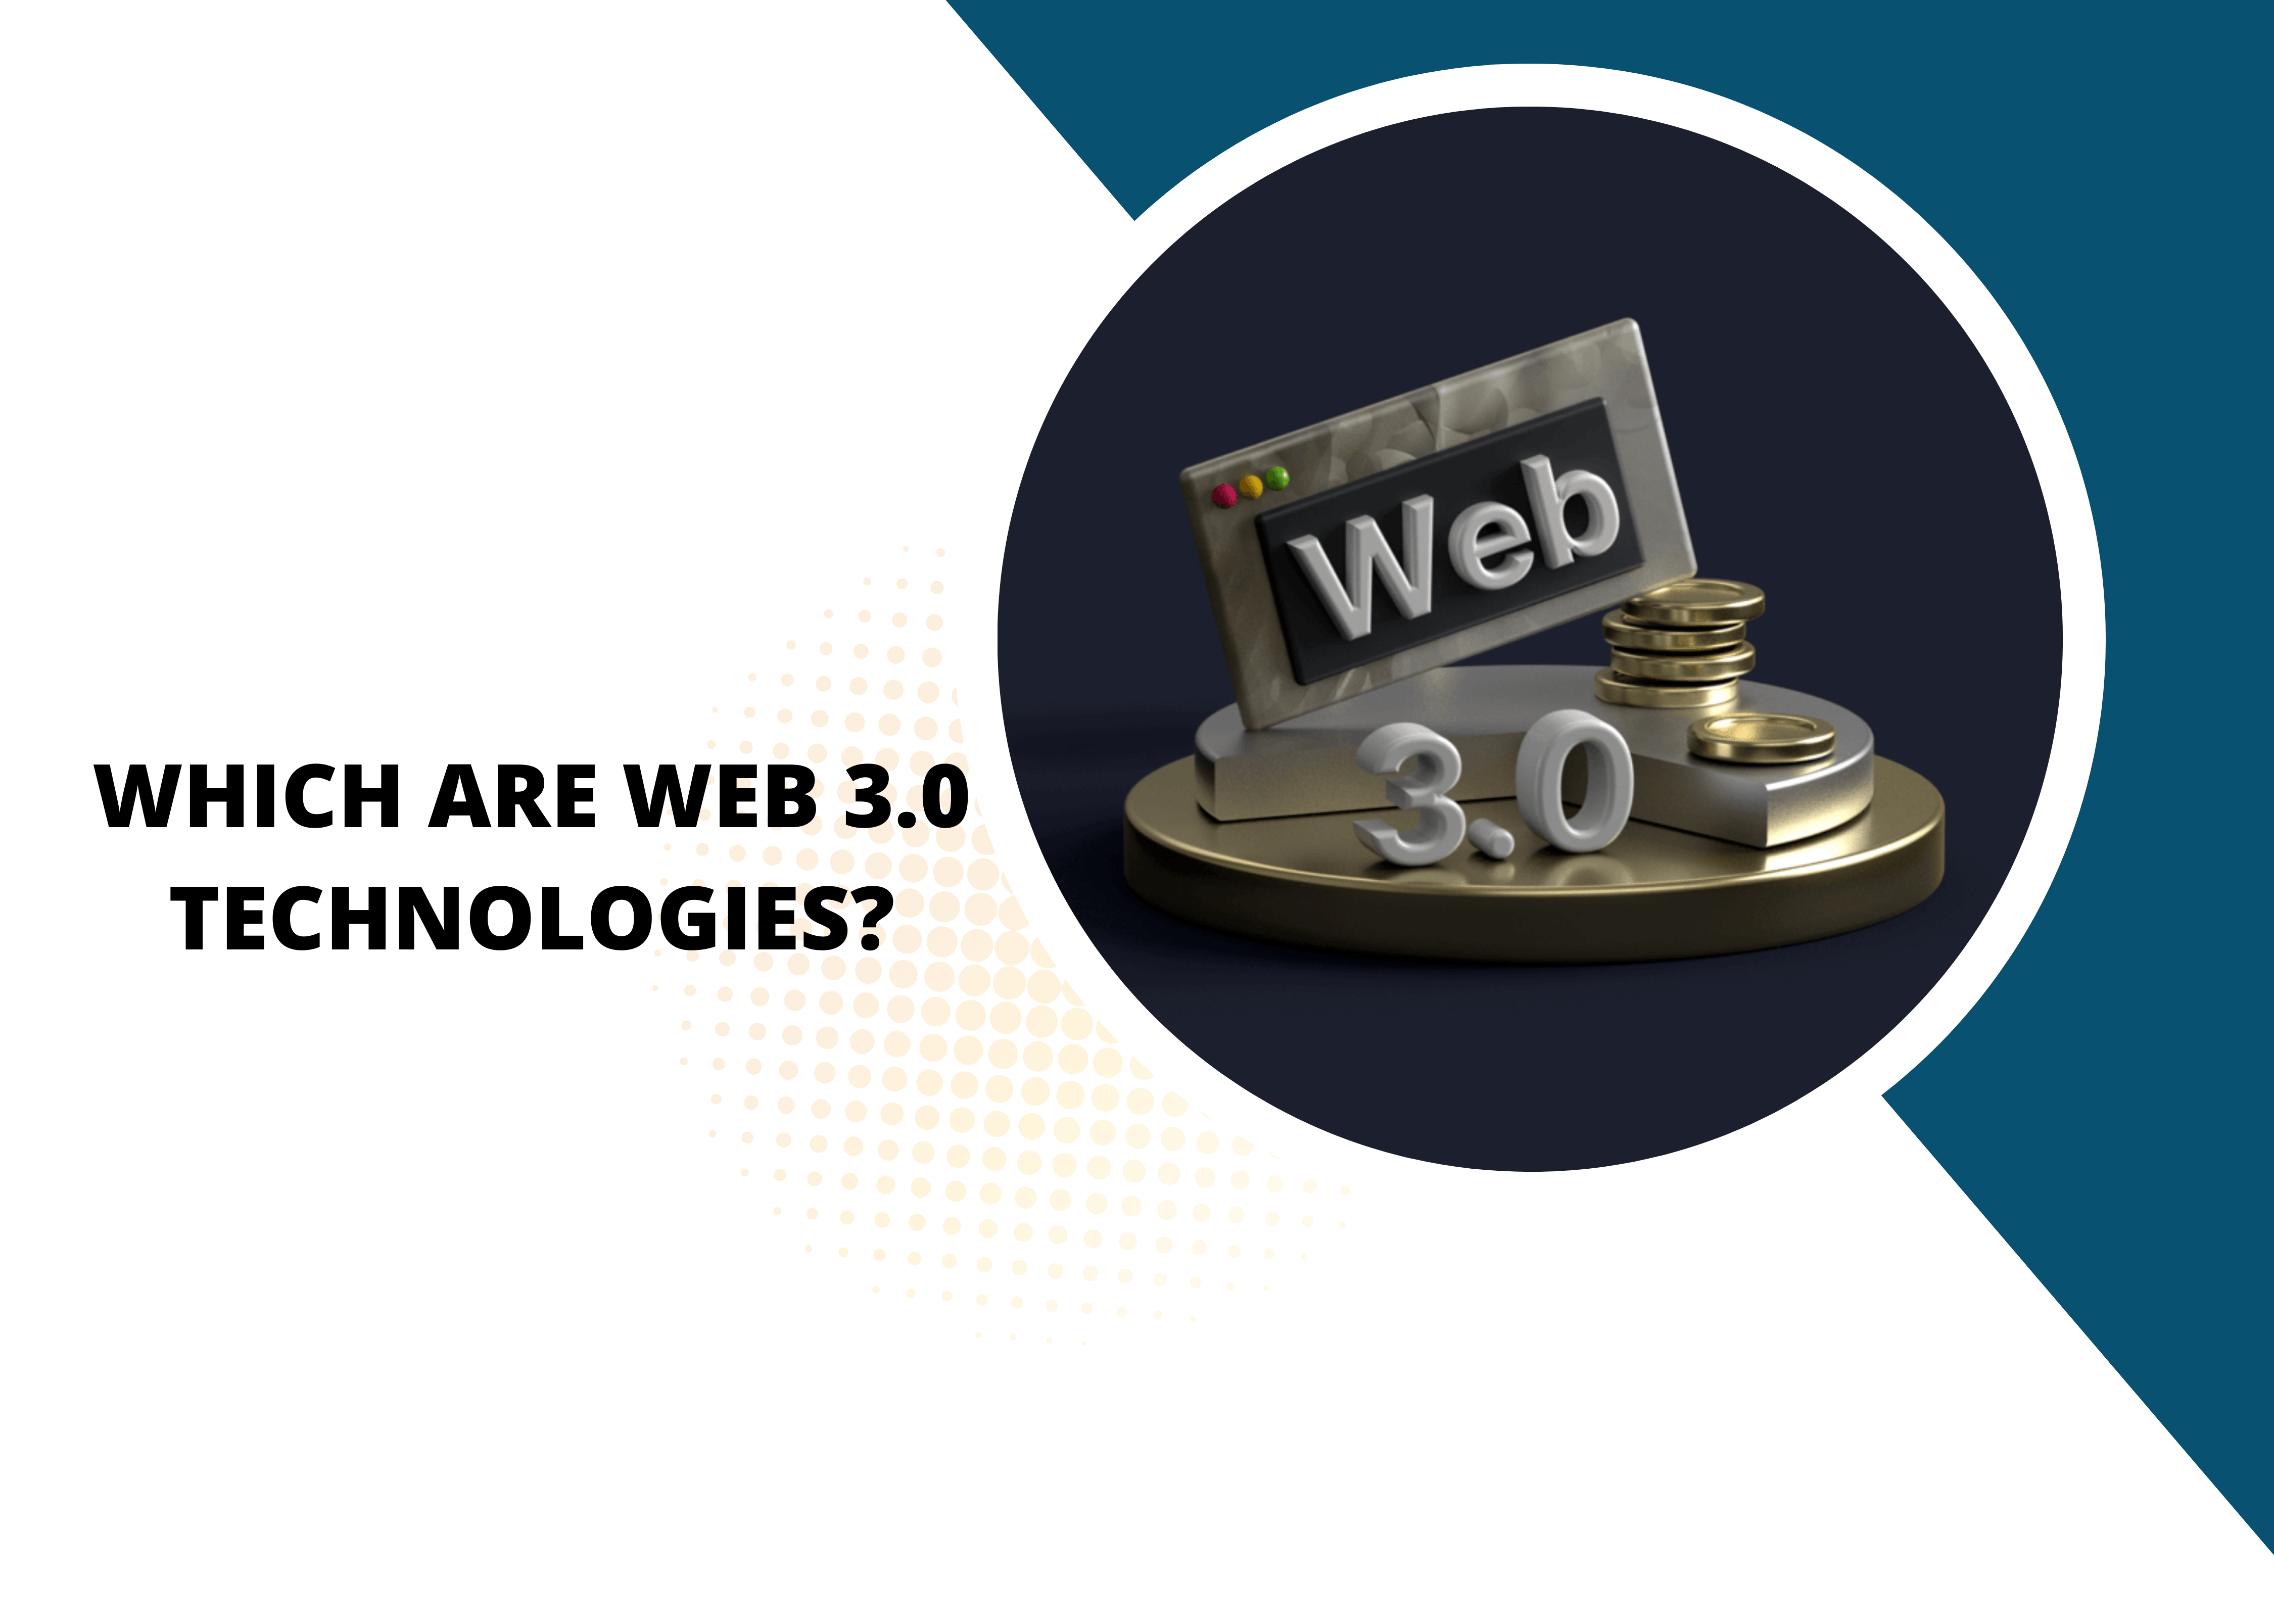 "Alt text for an image depicting Web 3.0 technologies: A visual representation with icons symbolizing key Web 3.0 technologies, including blockchain, decentralized identity, interoperability, semantic web, Web Assembly, peer-to-peer networks, and data ownership. The image reflects the interconnected and decentralized nature of these technologies, illustrating their role in reshaping the landscape of the internet towards a more secure, intelligent, and user-centric paradigm."